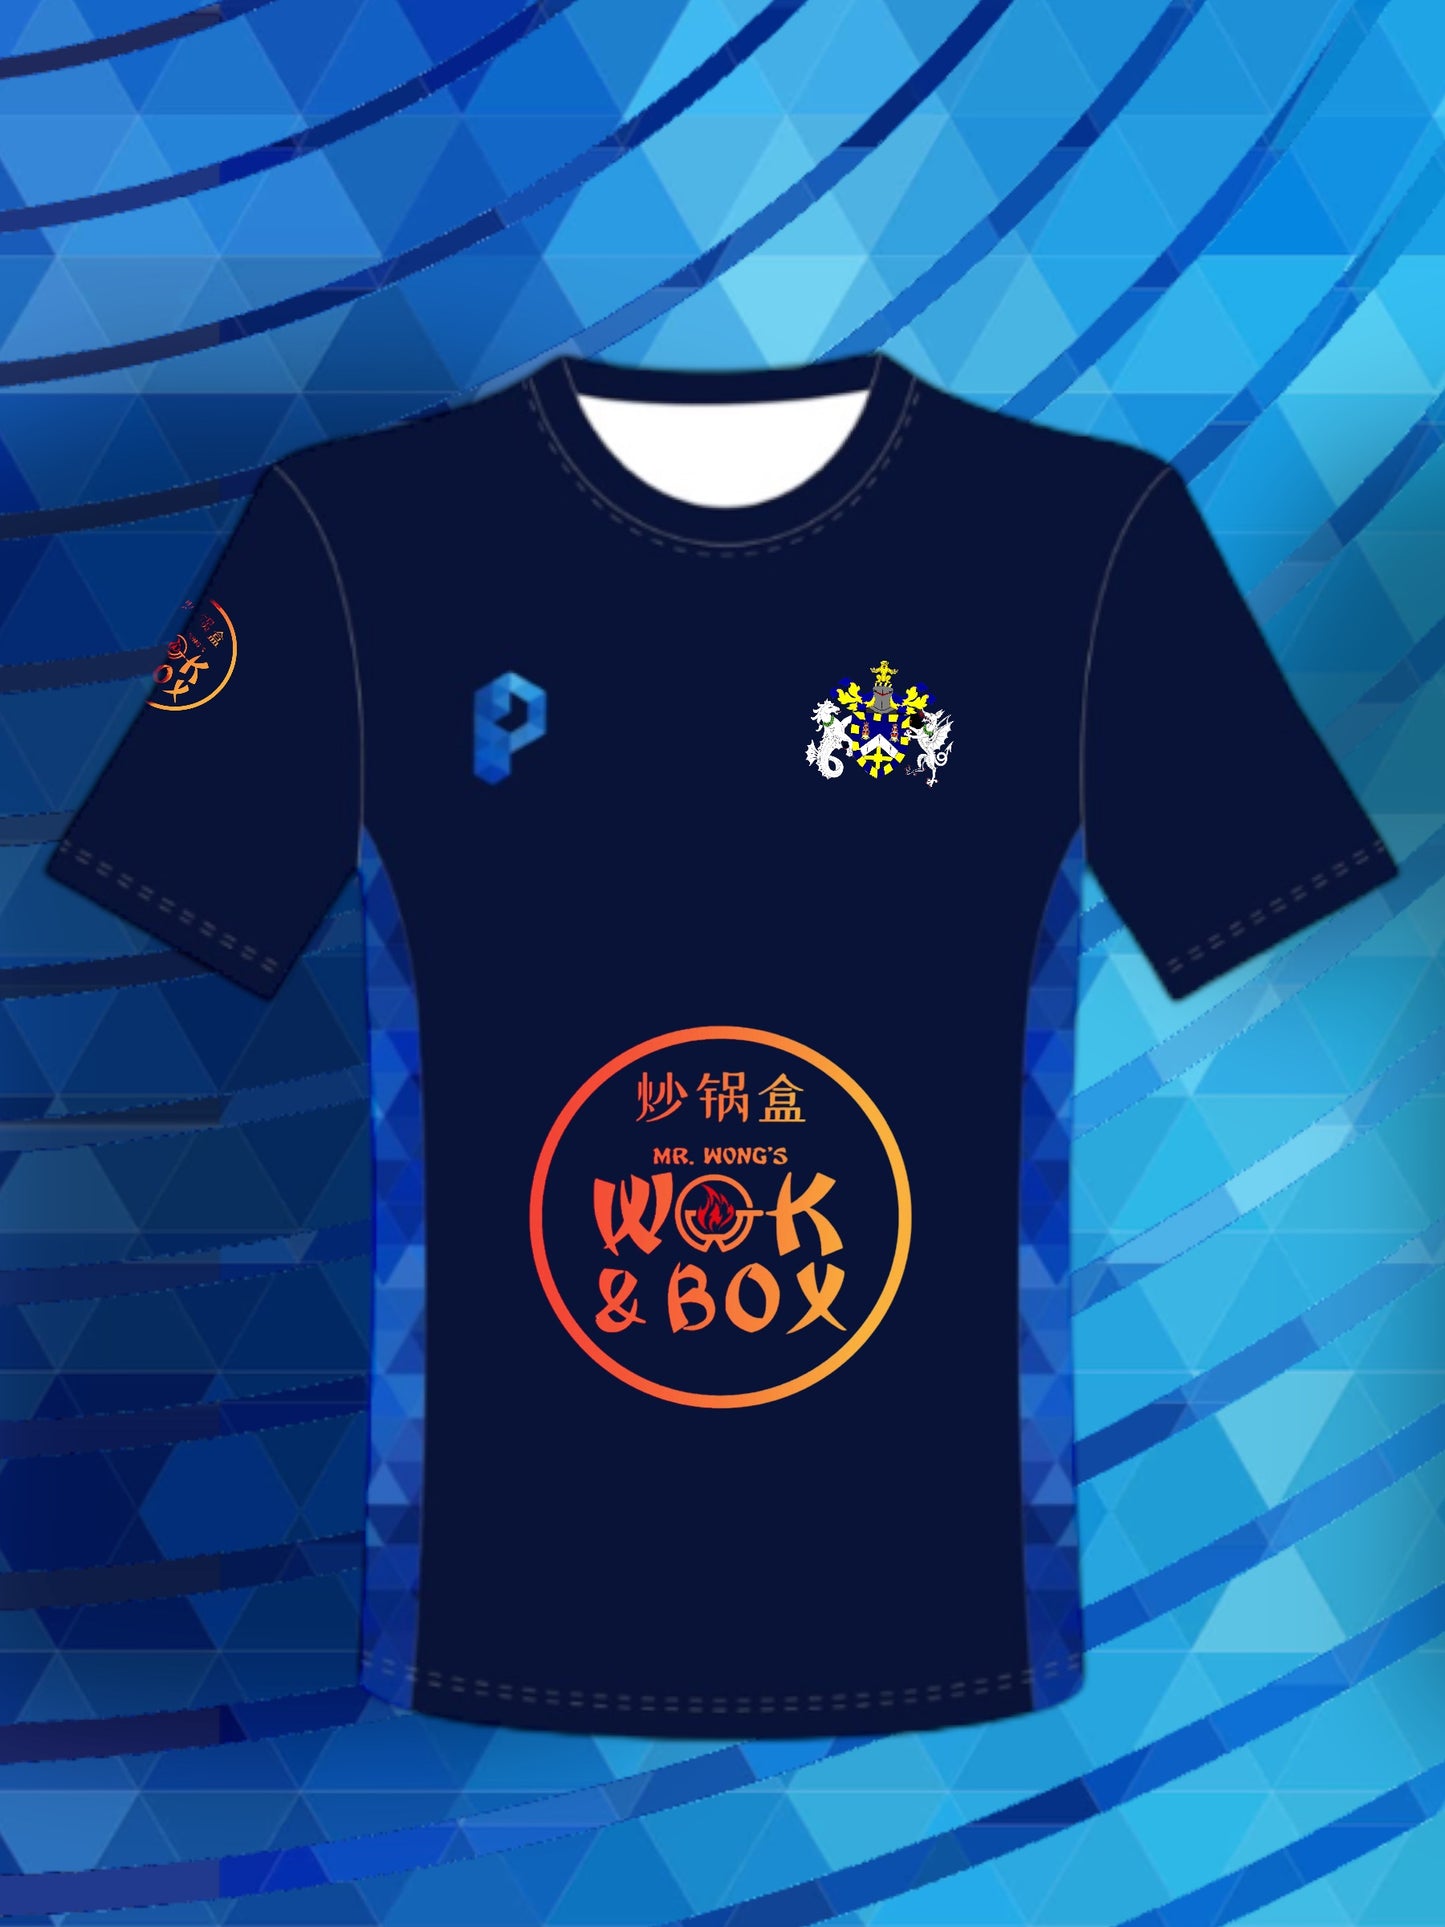 Prophecy Training Shirt - Queen Mary University Cricket Club